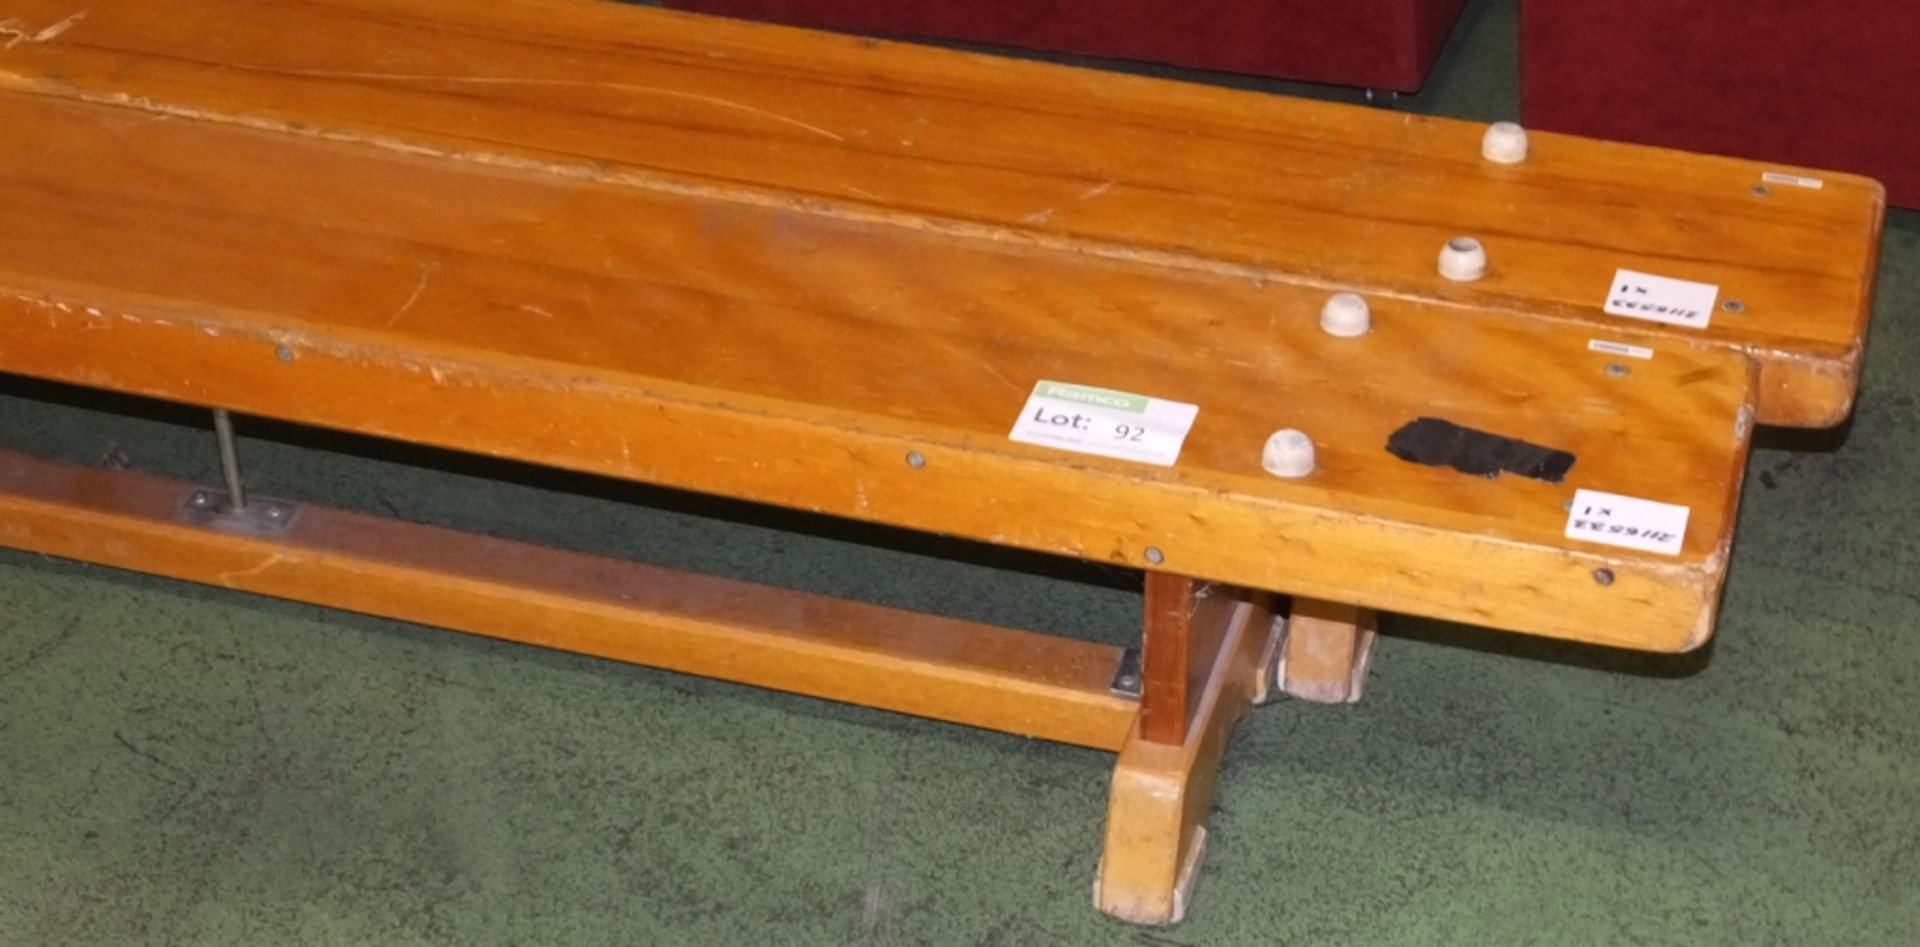 2x Gymnastic Benches - Image 2 of 2